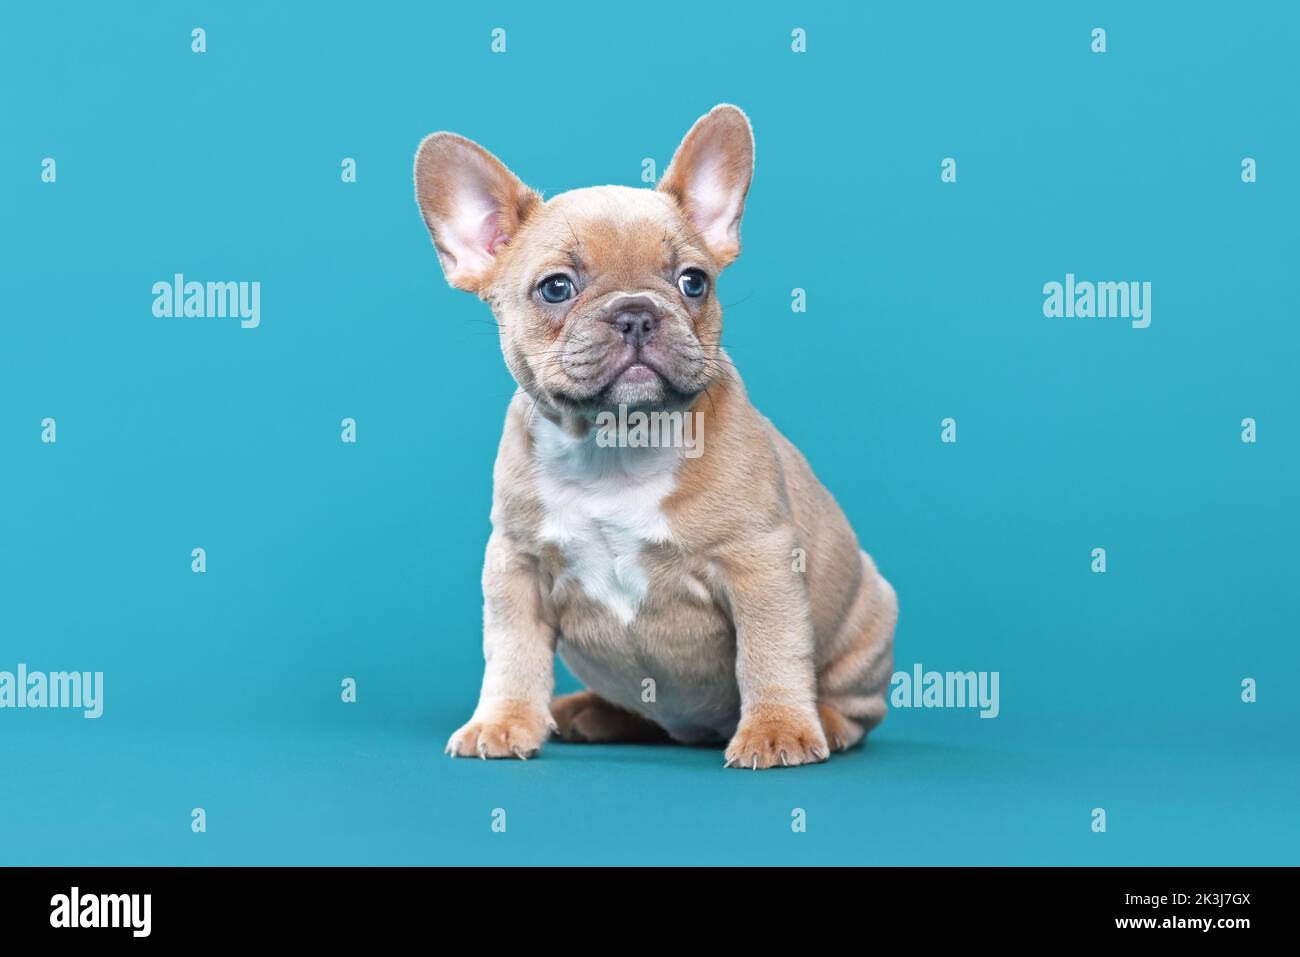 Cute lilac red fawn French Bulldog dog puppy sitting on blue background Stock Photo